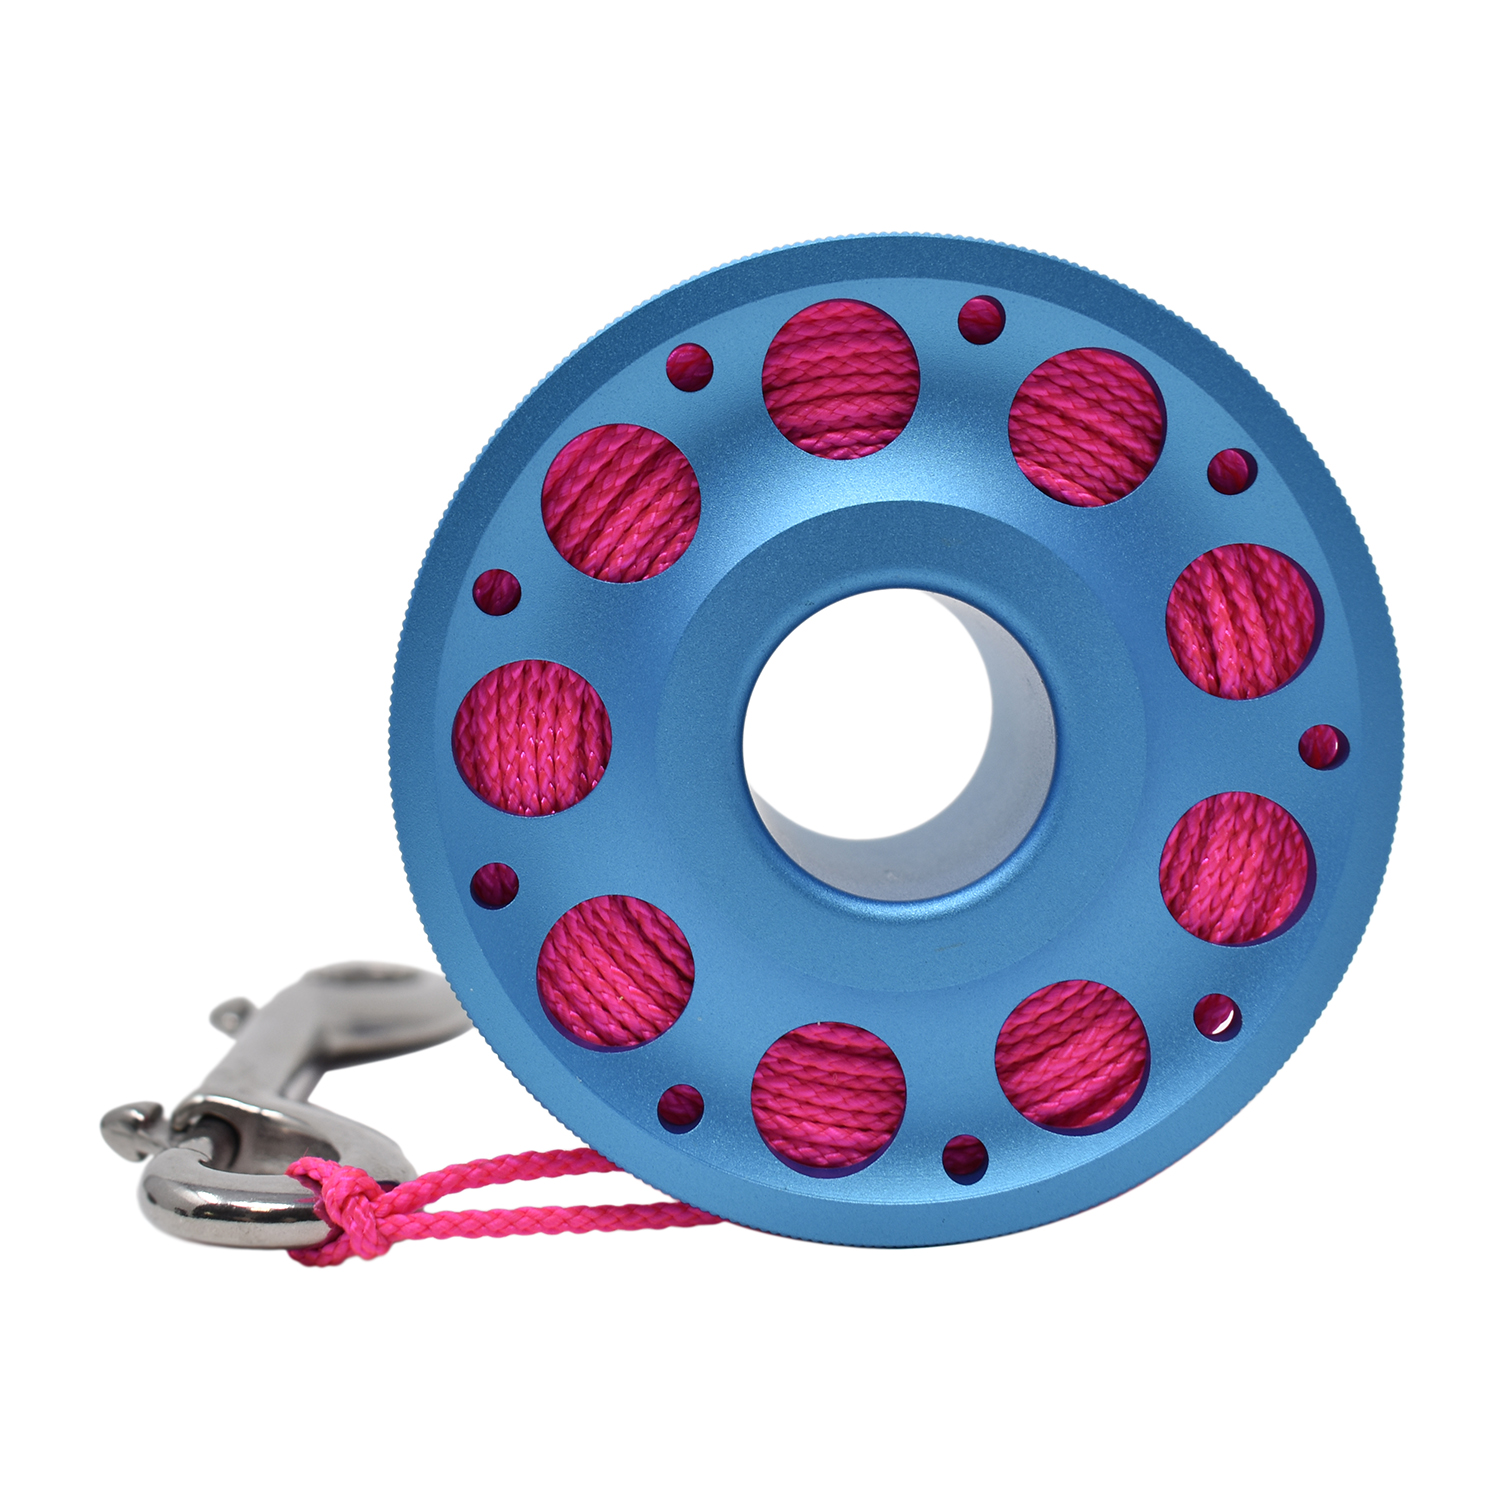 Aluminum Finger Spool 100ft Dive Reel w/ Retractable Holder, Baby Blue/Pink - image 4 of 4